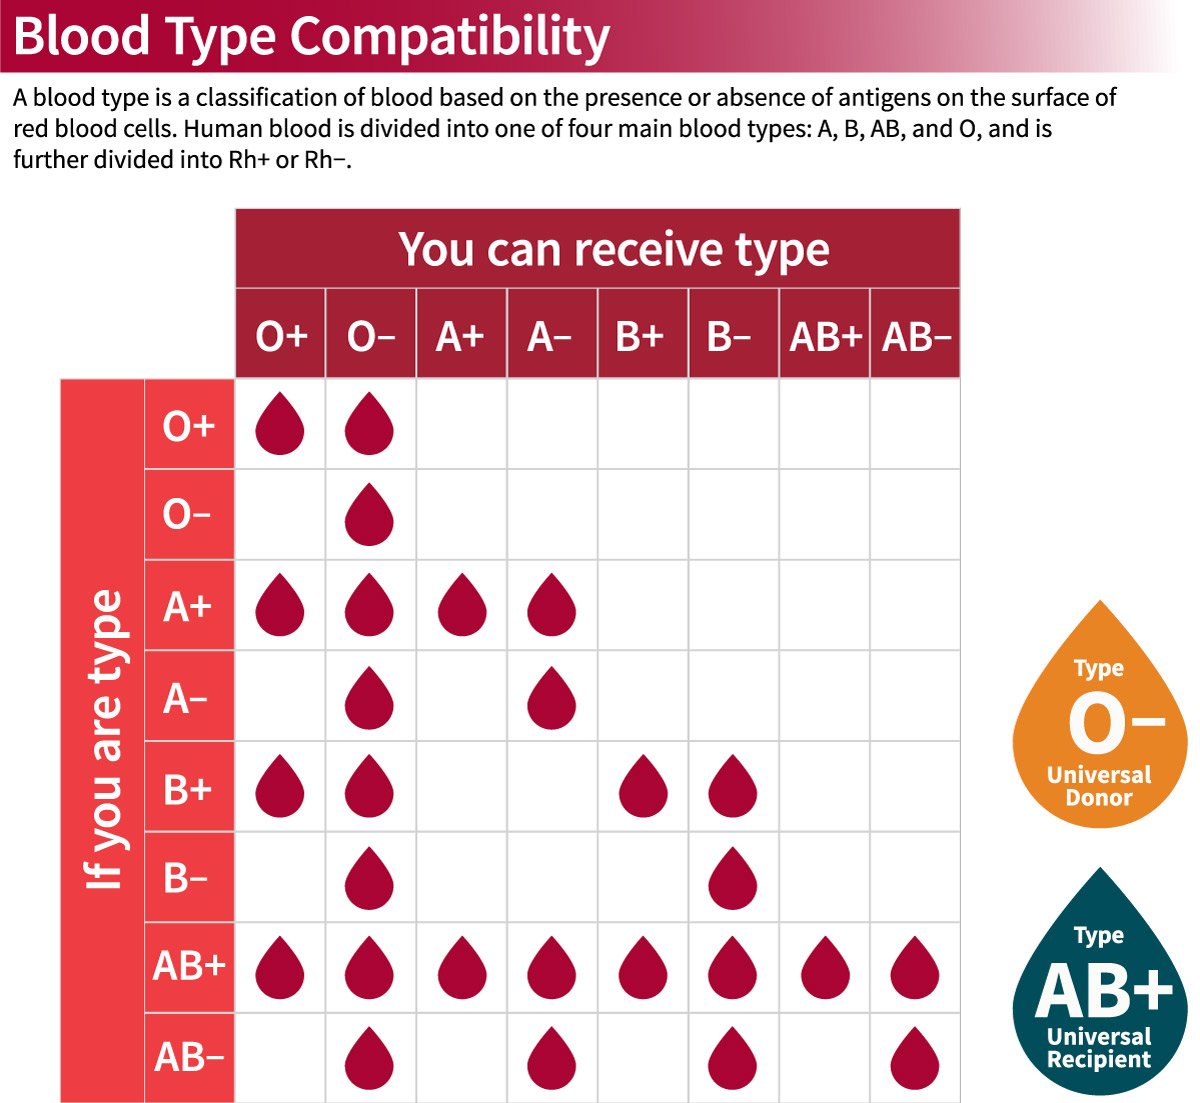 The incompatibility of blood types further limits options. If your blood group is O-, it is very difficult to discover compatible blood.